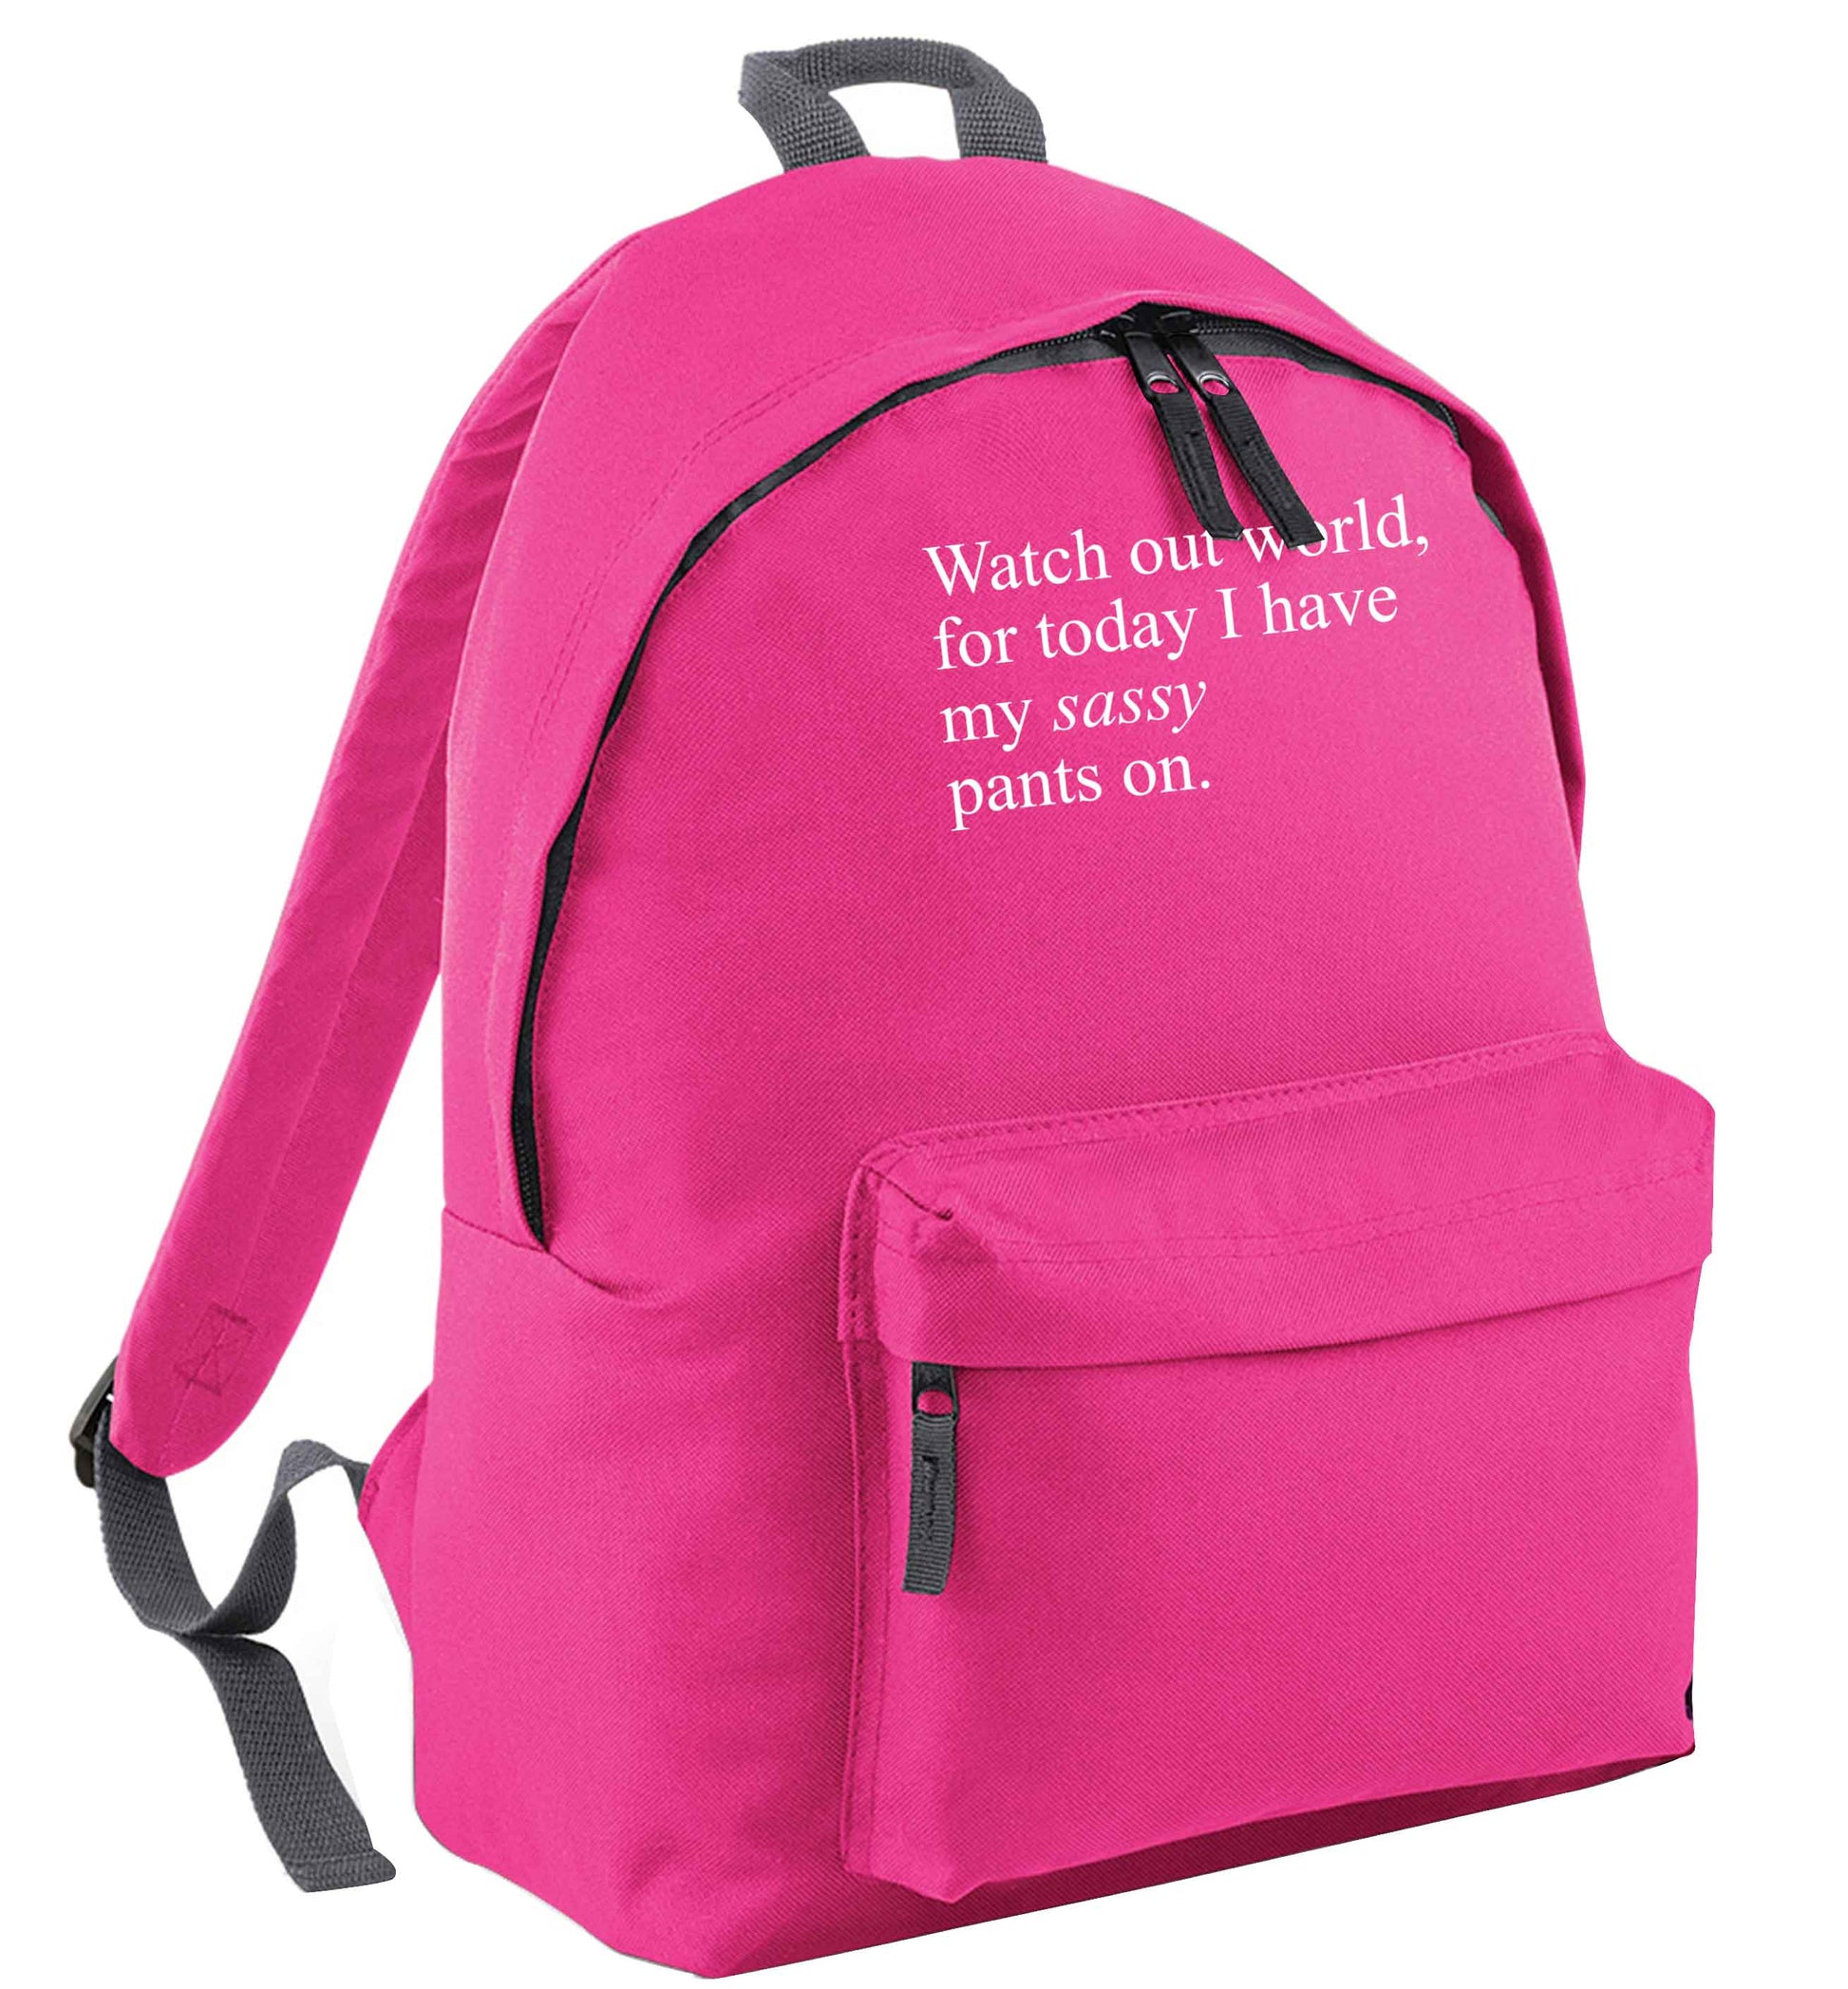 Watch out world for today I have my sassy pants on pink childrens backpack